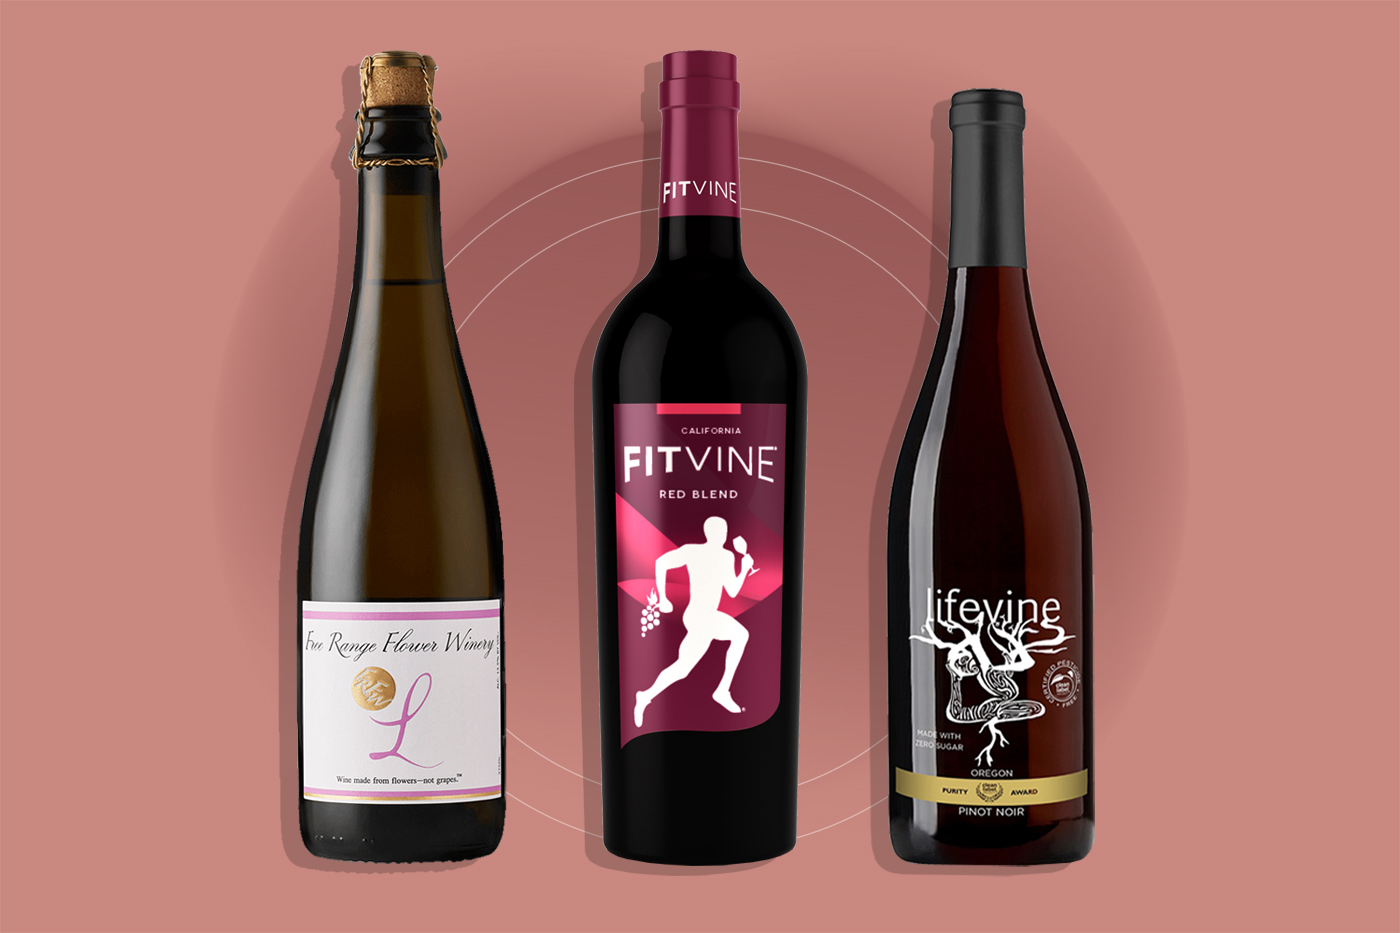 The Best Wines To Drink If You're Trying To Lose Weight